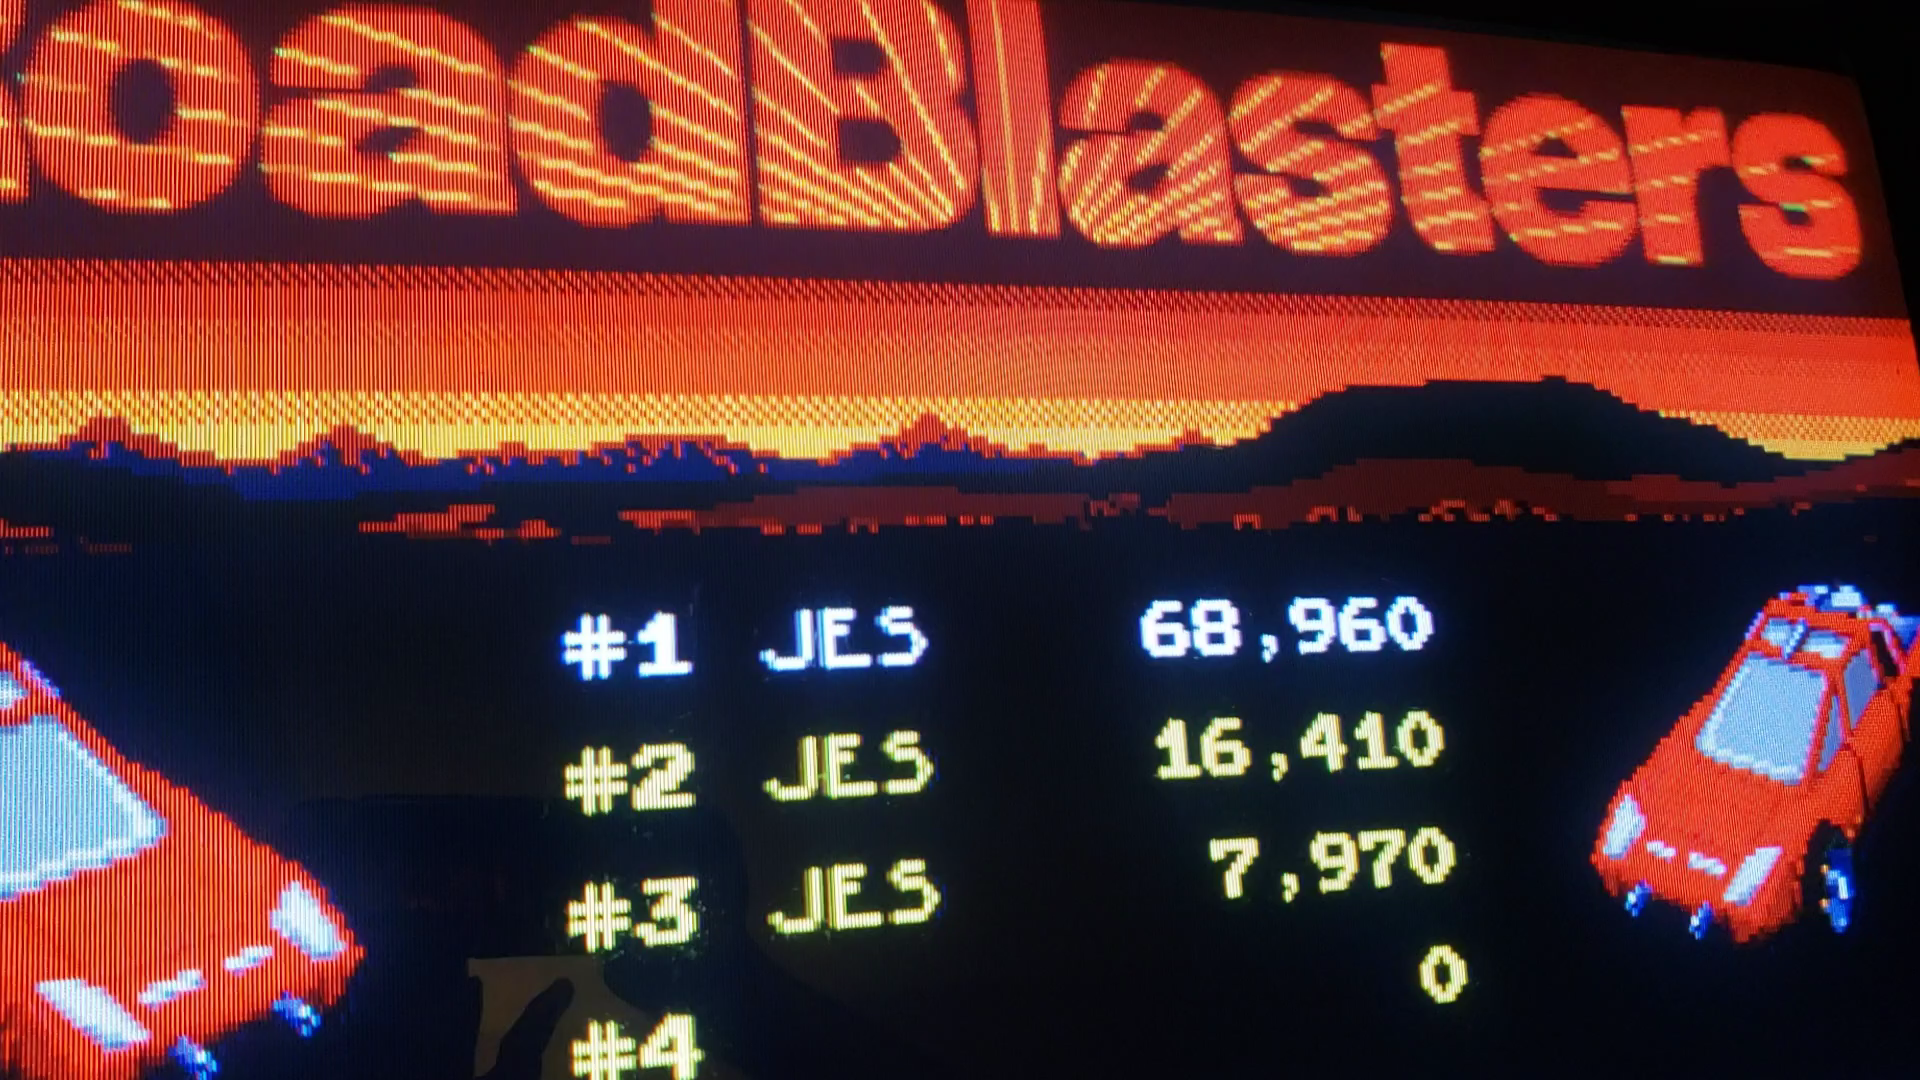 JES: RoadBlasters [Level 4 Start] (Arcade Emulated / M.A.M.E.) 68,960 points on 2021-03-02 03:33:52